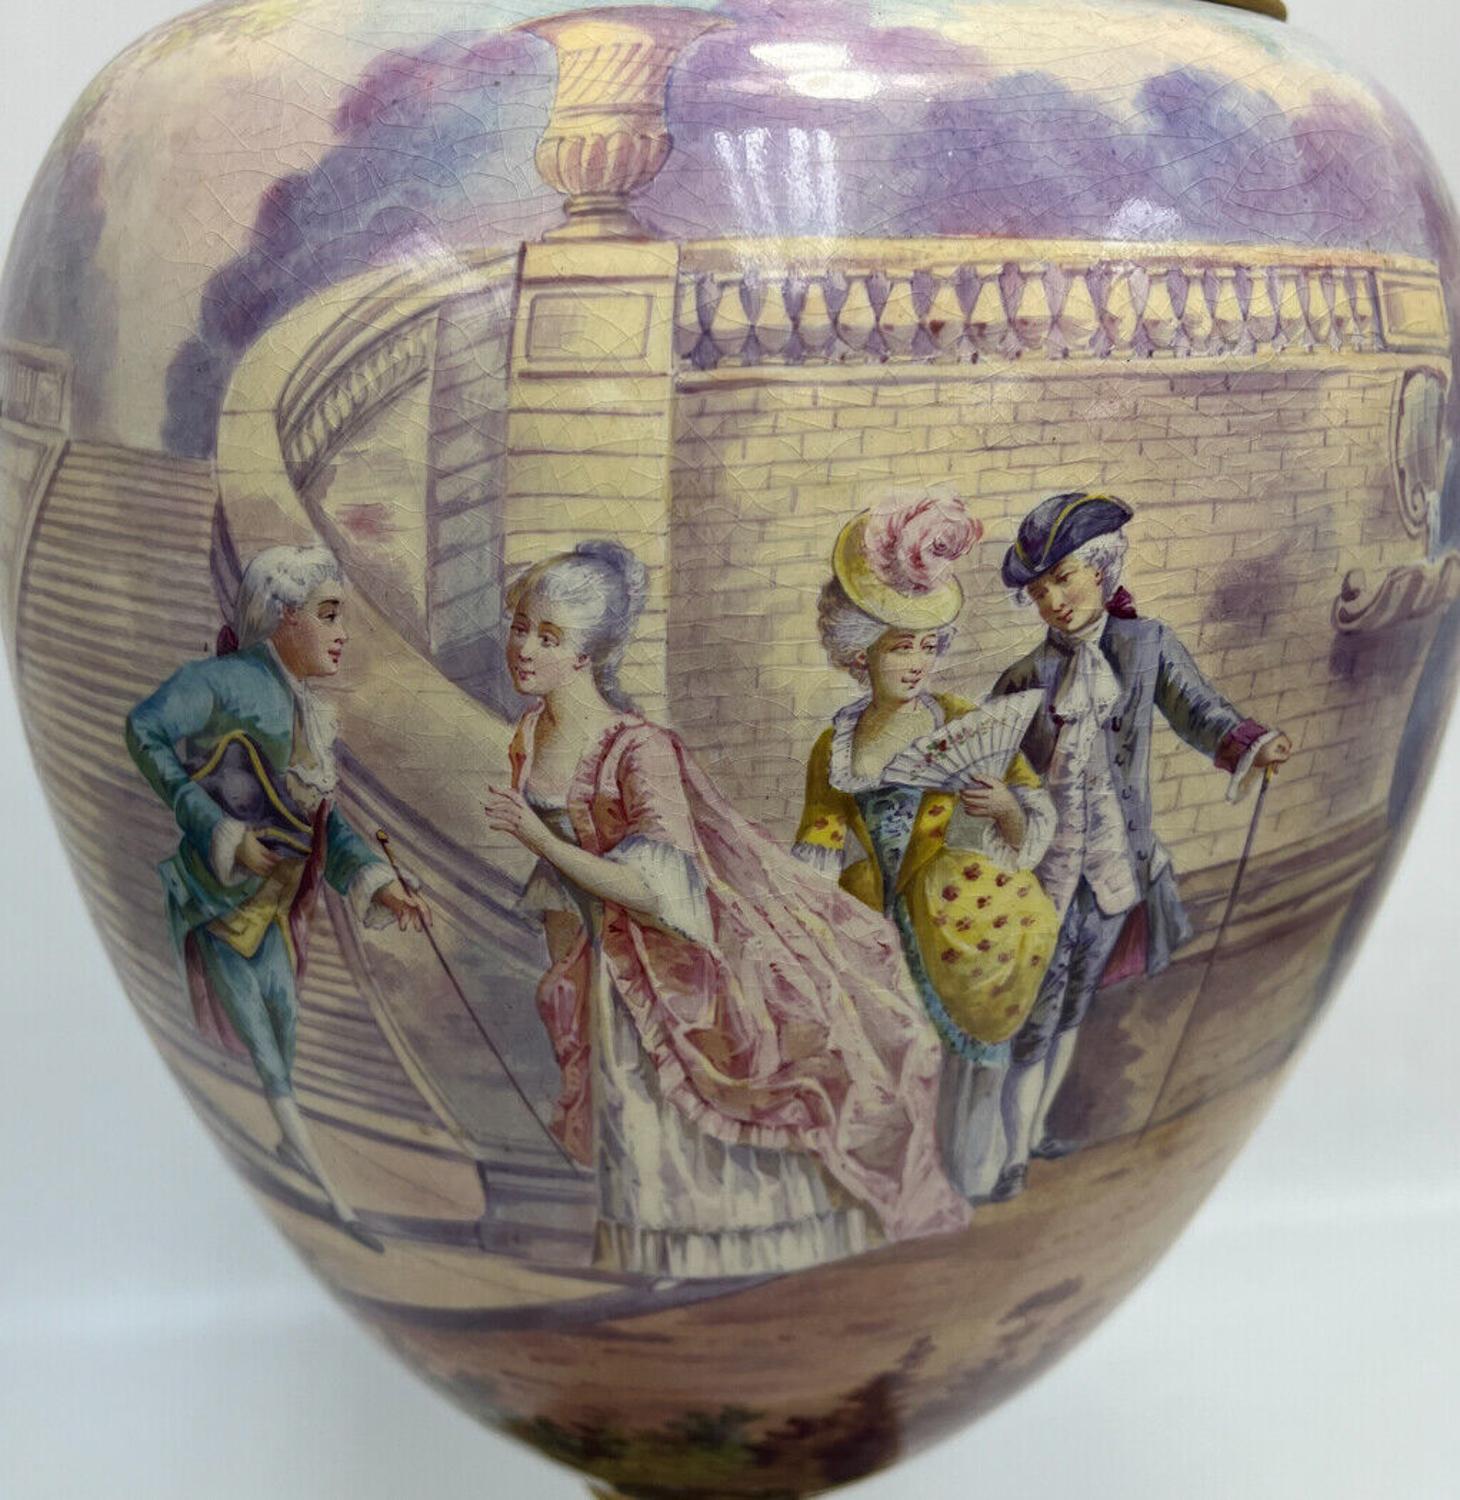  Sevres France Porcelain Large Decorative Urn, Late 19th Century  In Fair Condition For Sale In Gardena, CA